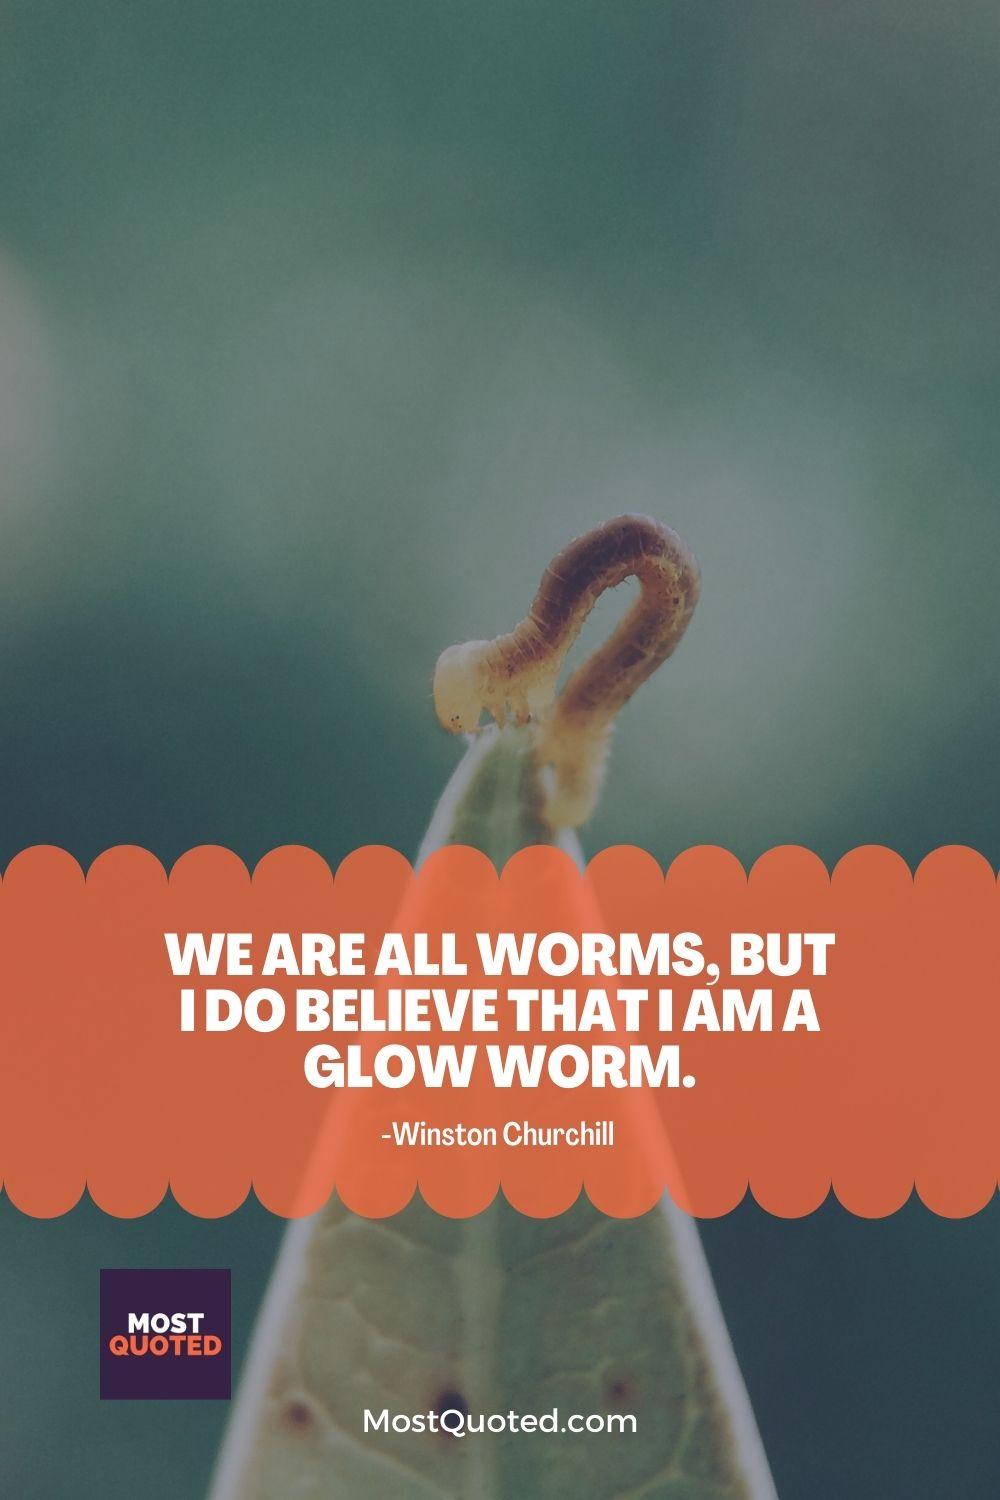 We are all worms, but I do believe that I am a glow worm. - Winston Churchill